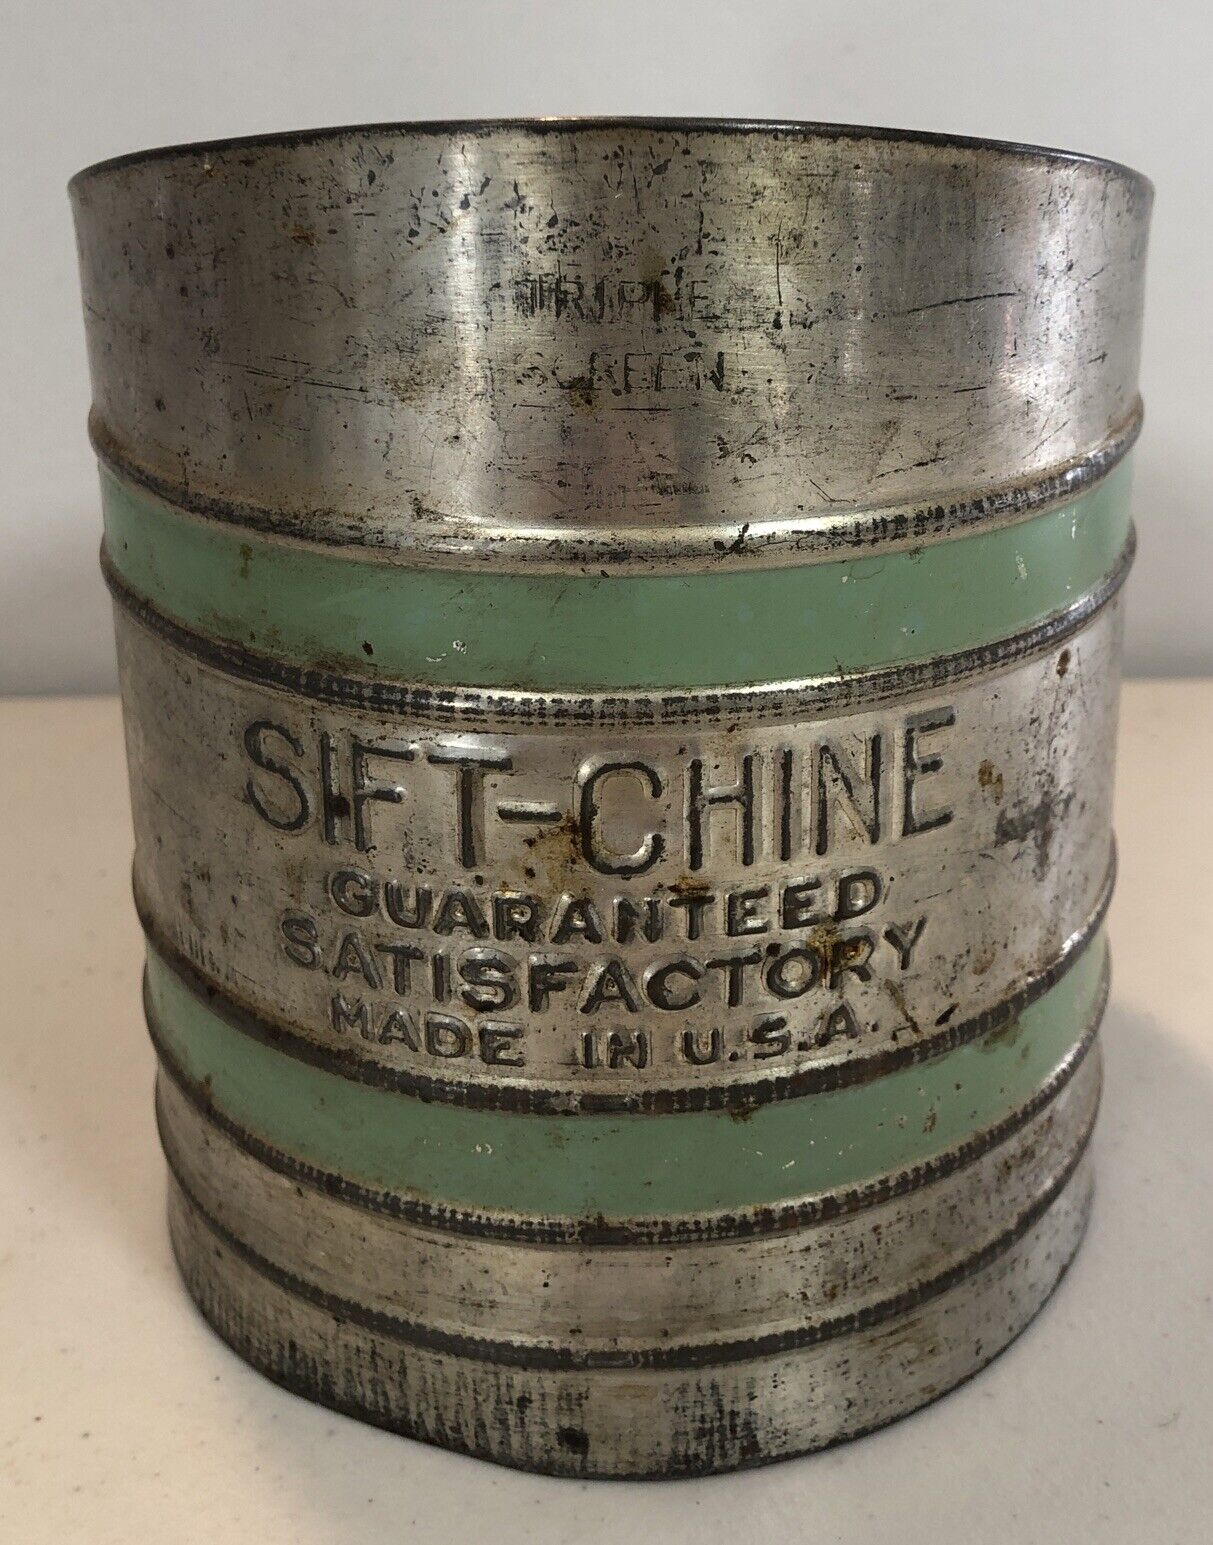 Vintage Foley Sift Chine Triple Screen Flour Sifter Works